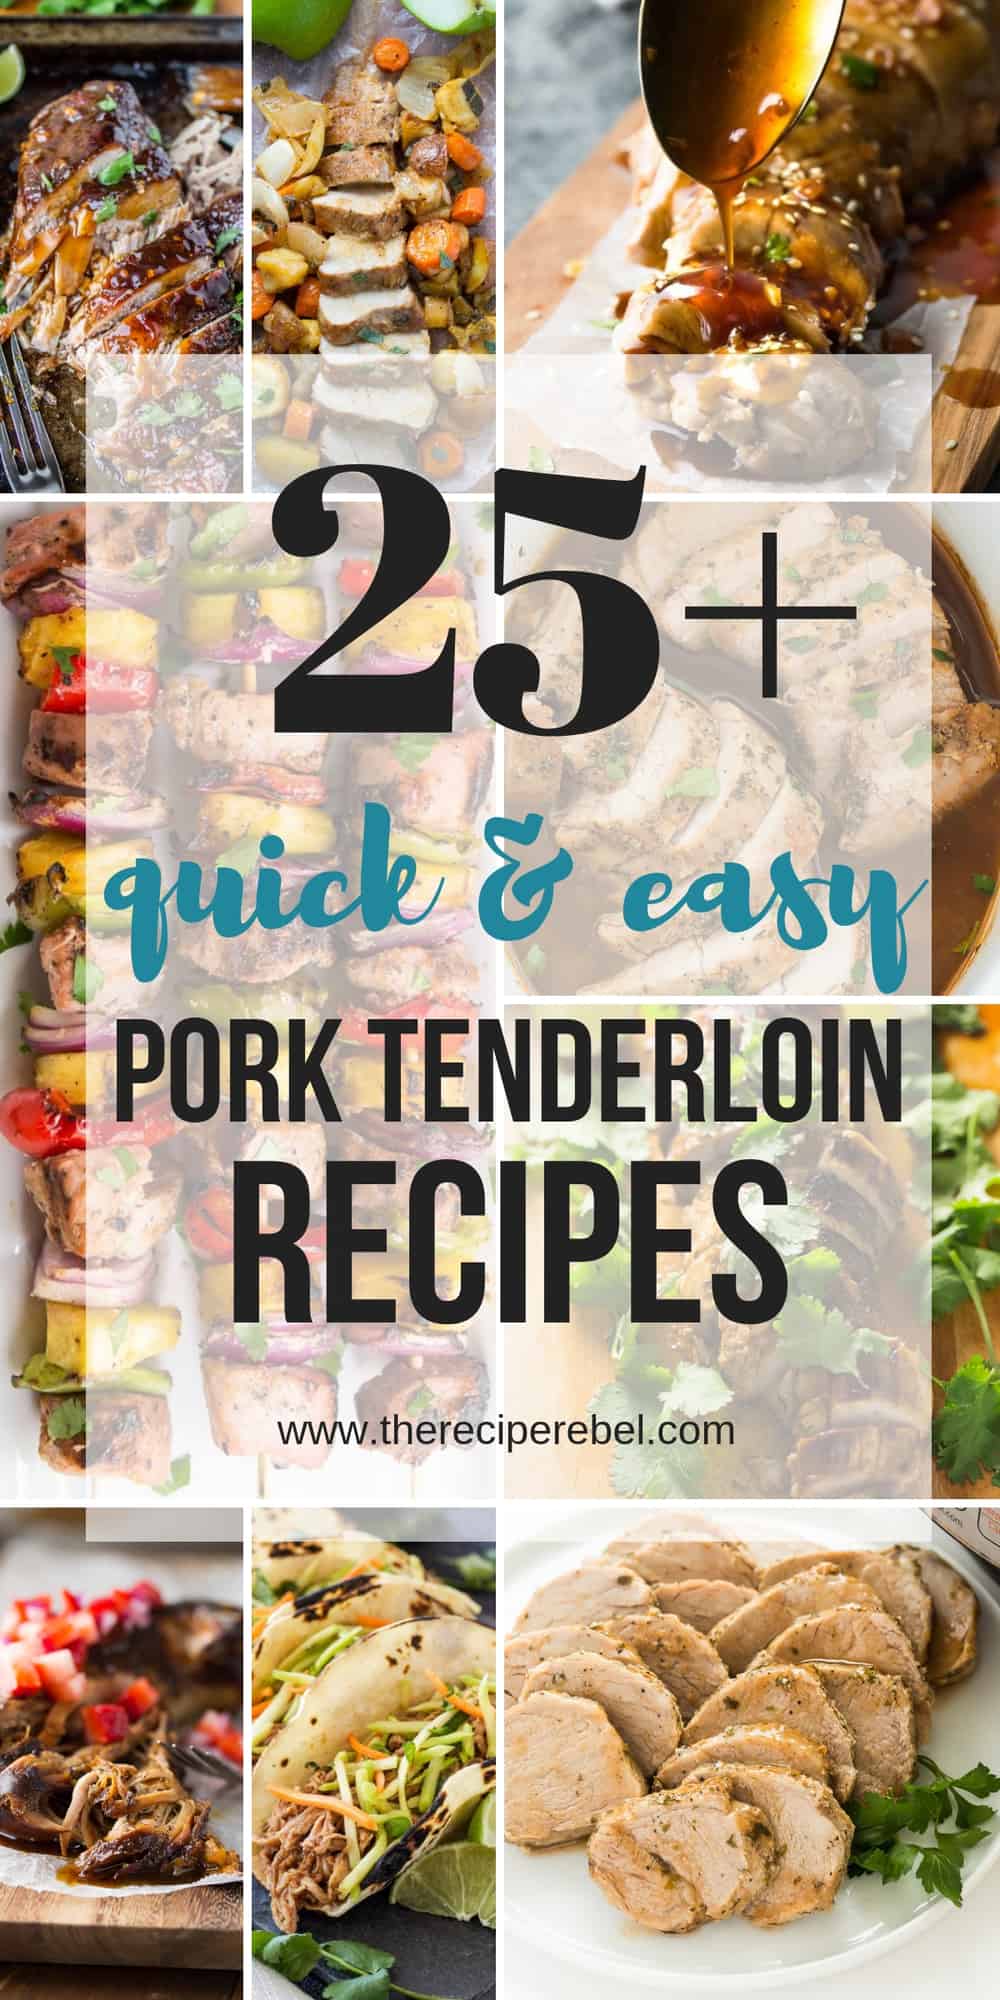 pork tenderloin recipes pinterest collage with multiple images and a title in black and blue text